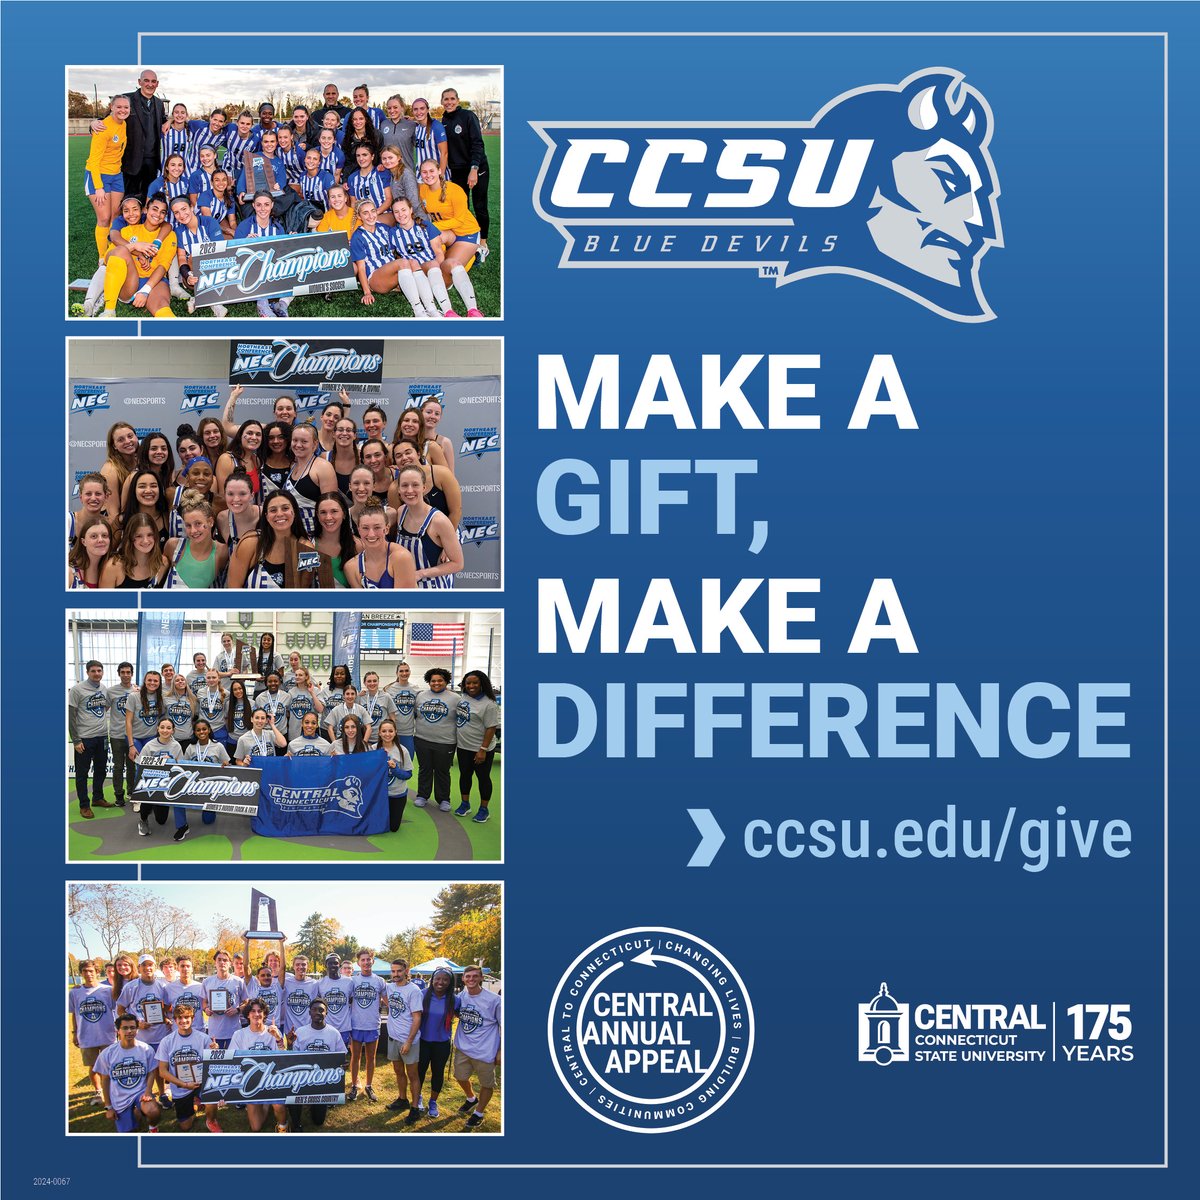 Your generosity has contributed to the success of our university off and on the field; bearing 4 conference championships! Your continued support will contribute to empowering the next generation of Blue Devils🔱 Visit ccsu.edu/give💙 #CCSU #WeAreCentral #give